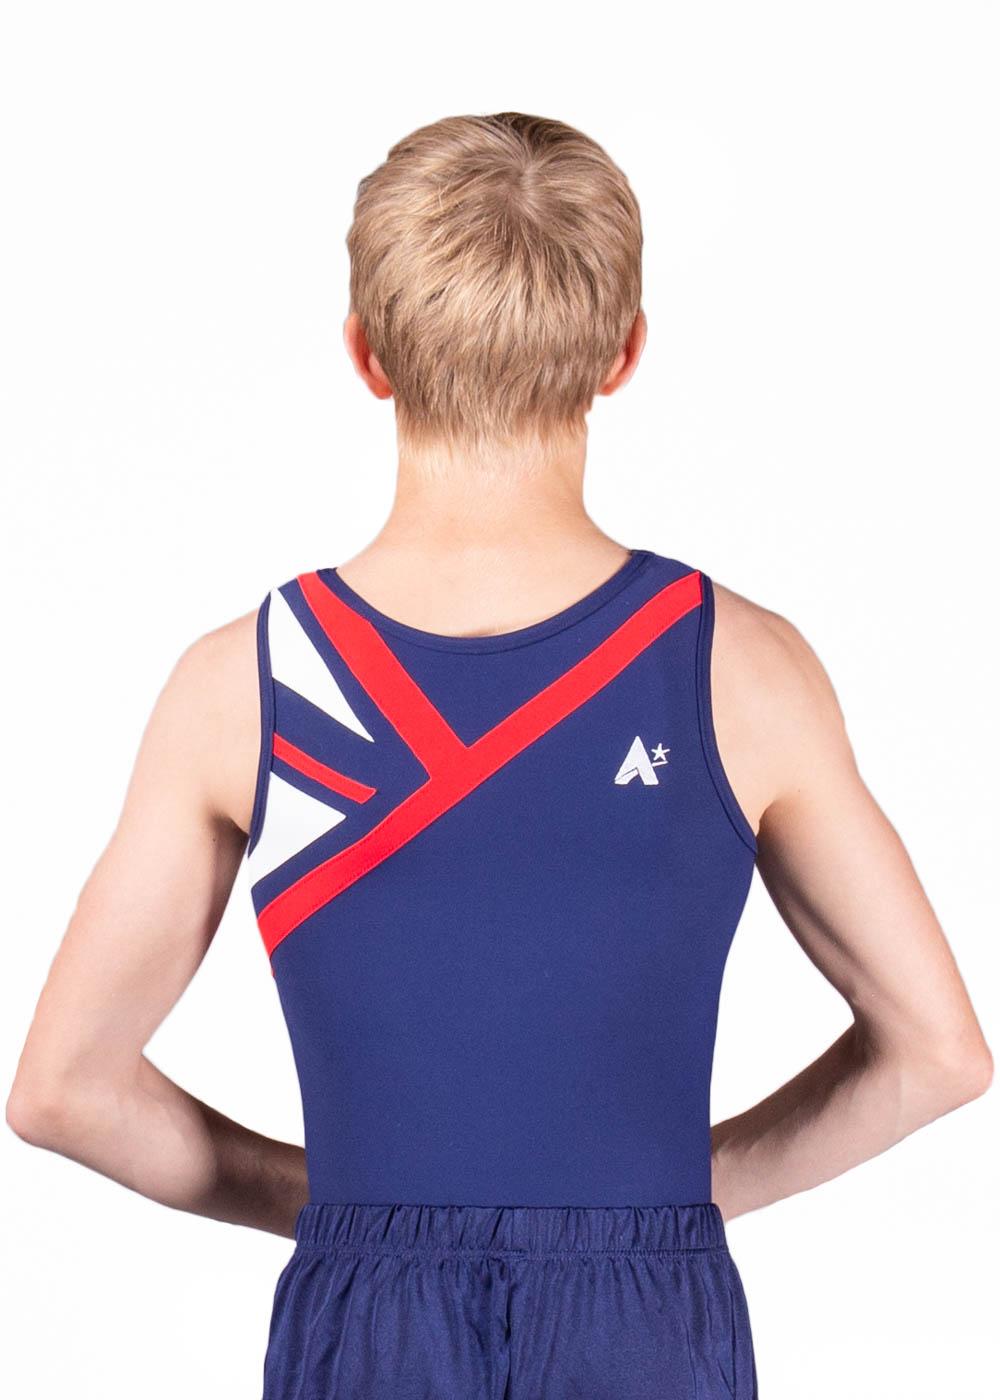 CHARLES - BVZ23:- Mens leotard in Navy, Red and White - A Star Leotards